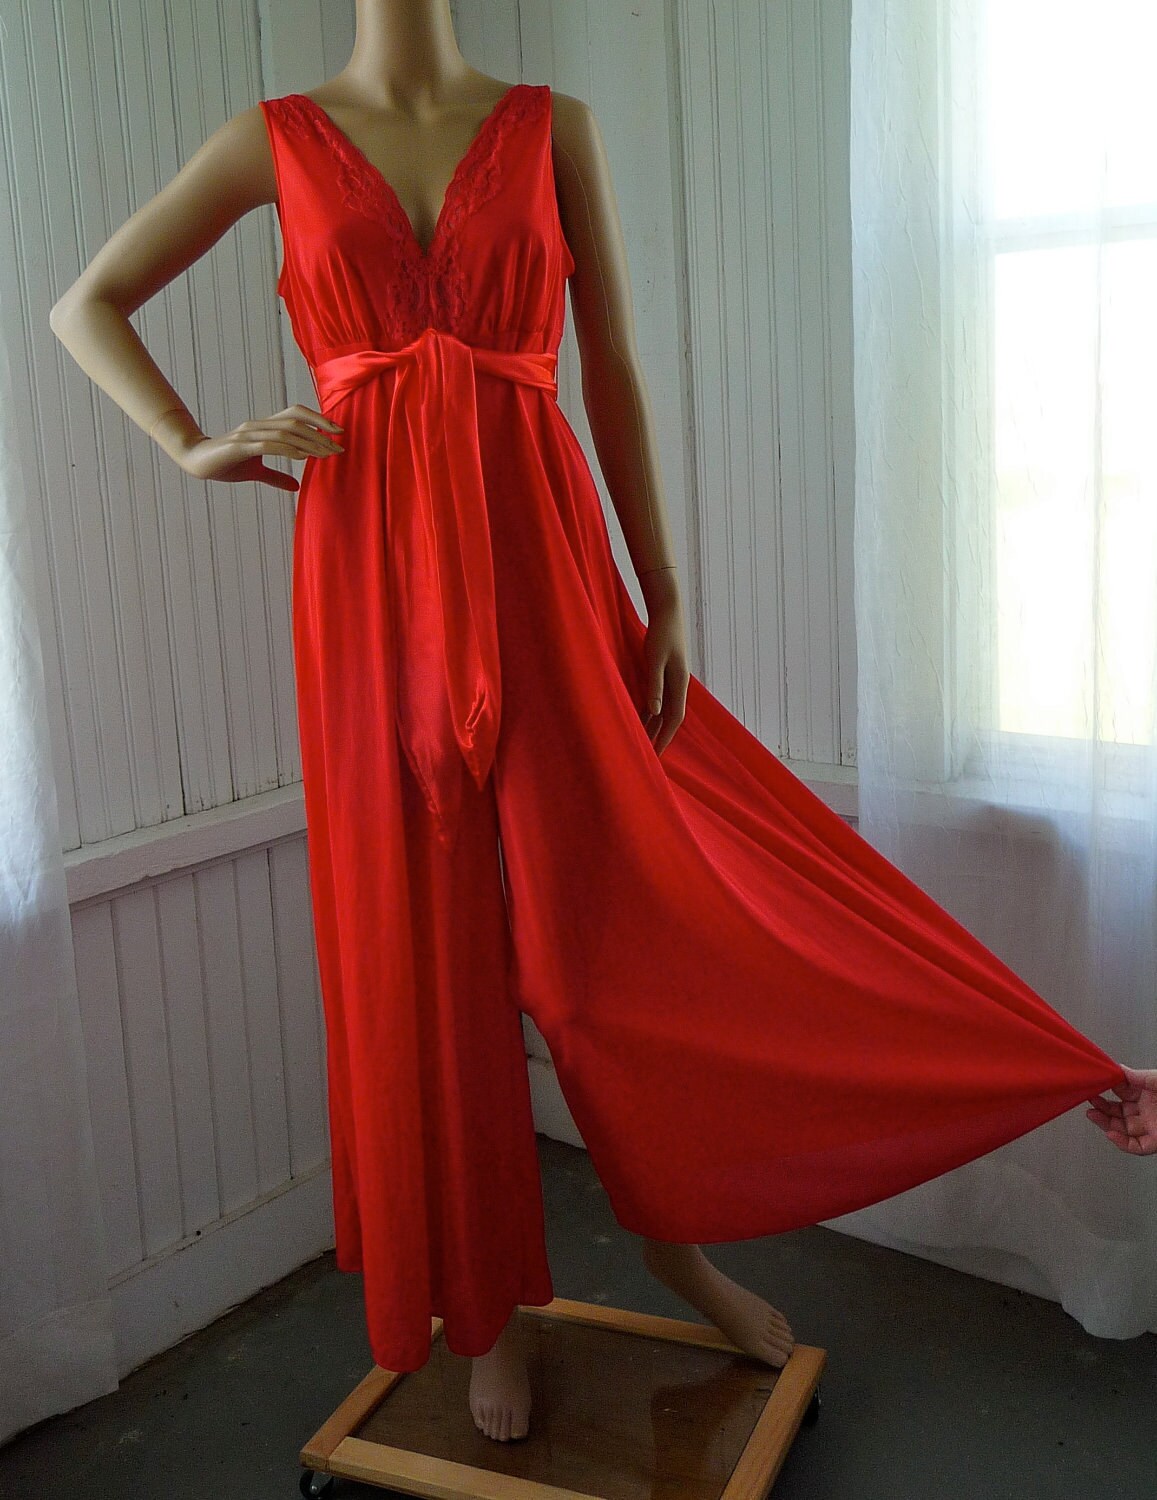 Vintage cherry bomb red nightgown jump suit palazzo by Sparcle